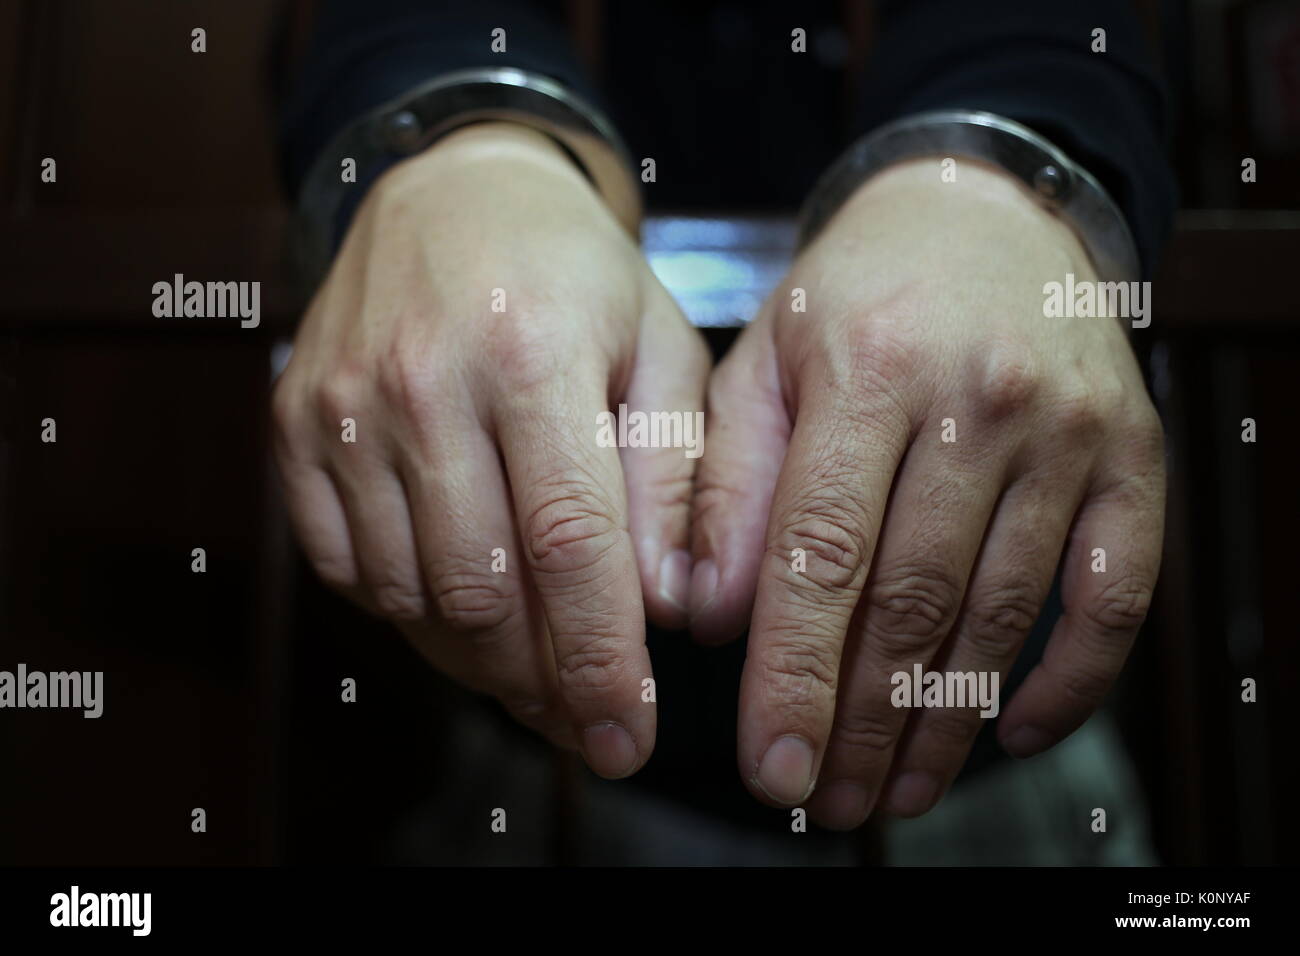 Abstract. Hands of the prisoner on a steel lattice close up. Prison, man in handcuffs. Detail of hands with steel handcuffs. Stock Photo